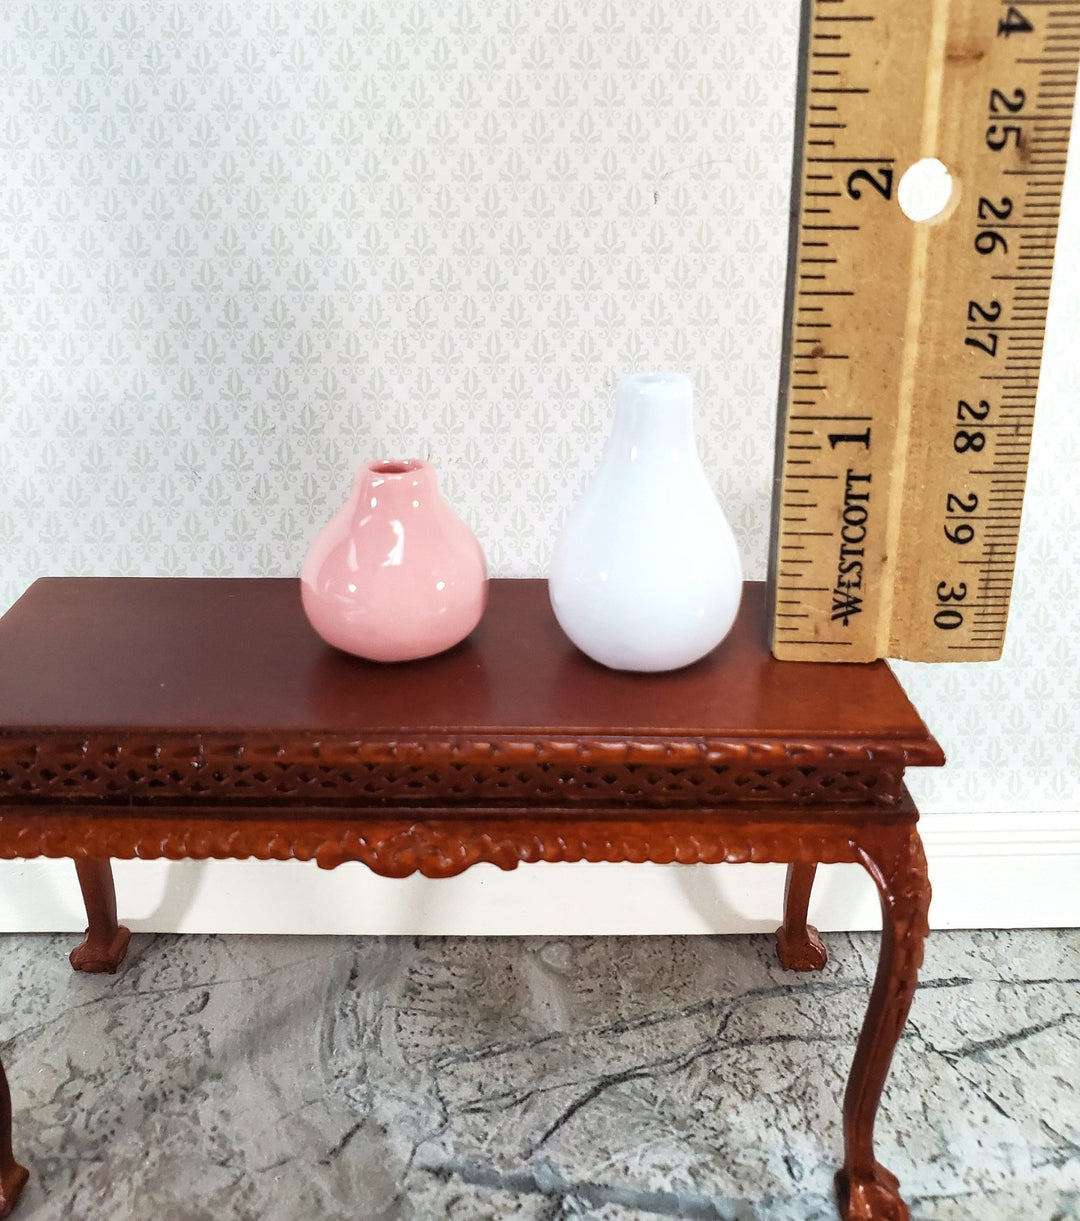 Dollhouse Pink & White Vases Ceramic LARGE Miniature Use in 1:12 or 1/6 Scale - Miniature Crush